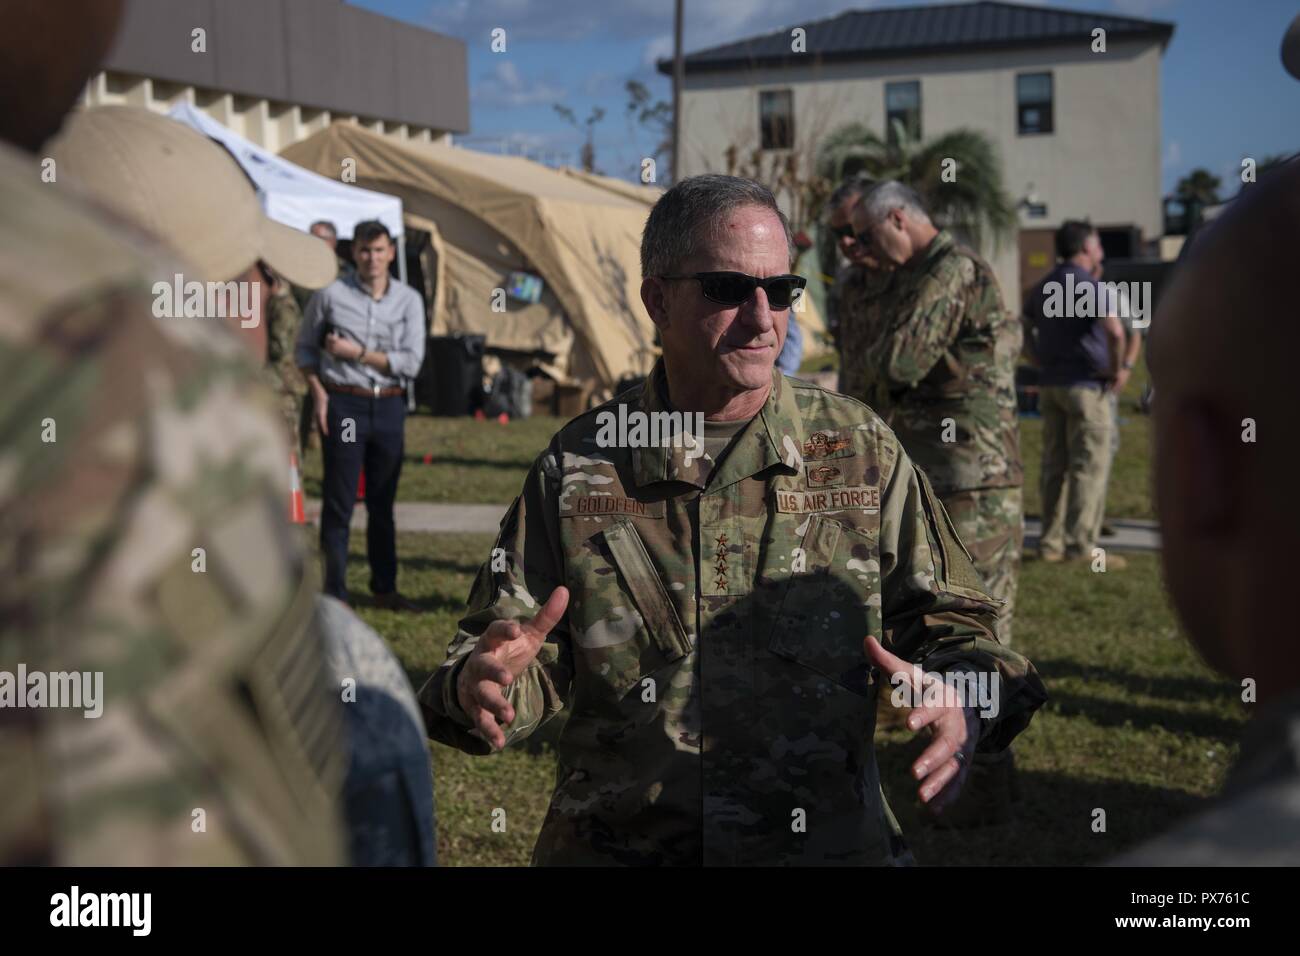 Air Force Chief of Staff Gen. David L. Goldfein speaks with Airmen at Tyndall Air Force Base, Florida, Oct. 14, 2018, October 14, 2018. Air Force senior leaders toured Tyndall Air Force Base to assess the damage from Hurricane Michael, one of the most intense tropical cyclones to ever hit the U.S. (U.S. Air Force photo by Senior Airman Joseph Pick). () Stock Photo